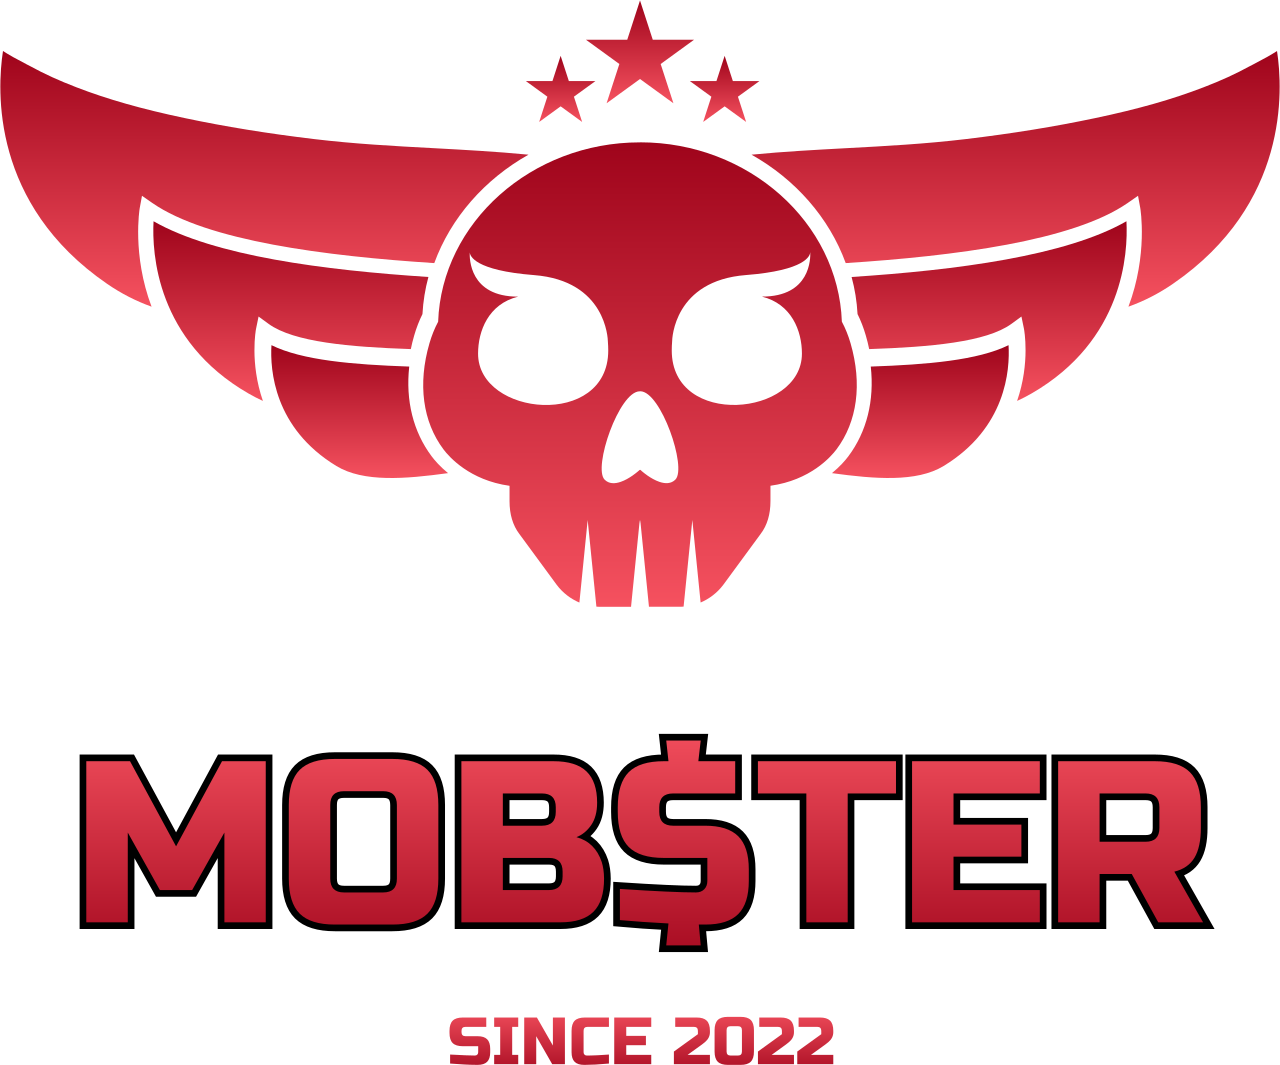 Mob$ter's web page